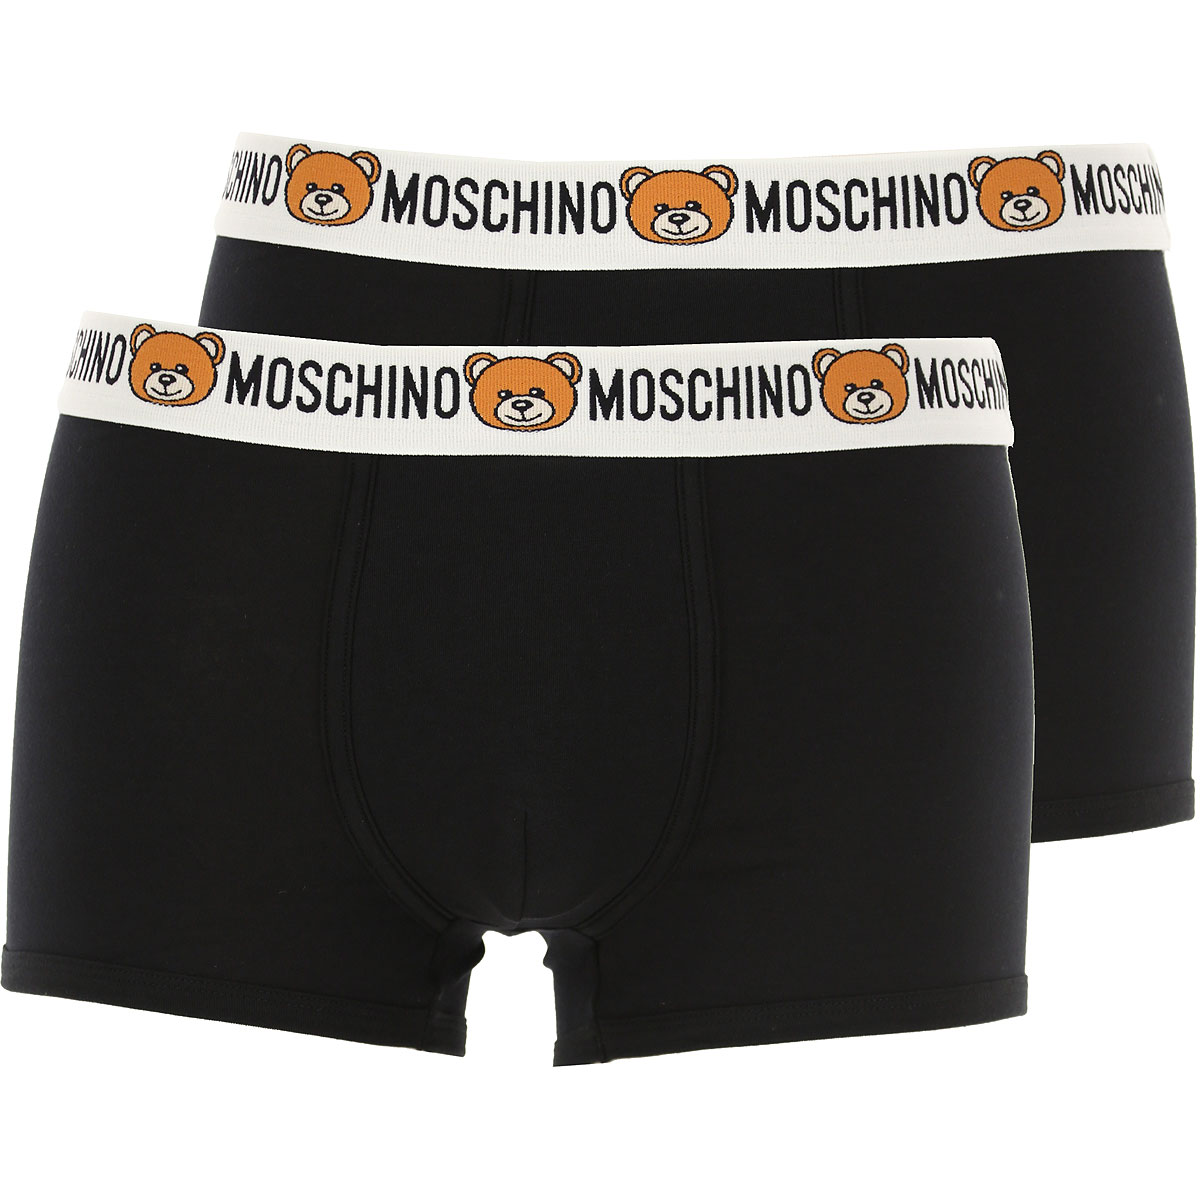 Mens Underwear Moschino, Style code: a4770_a2-8119_a2-0555